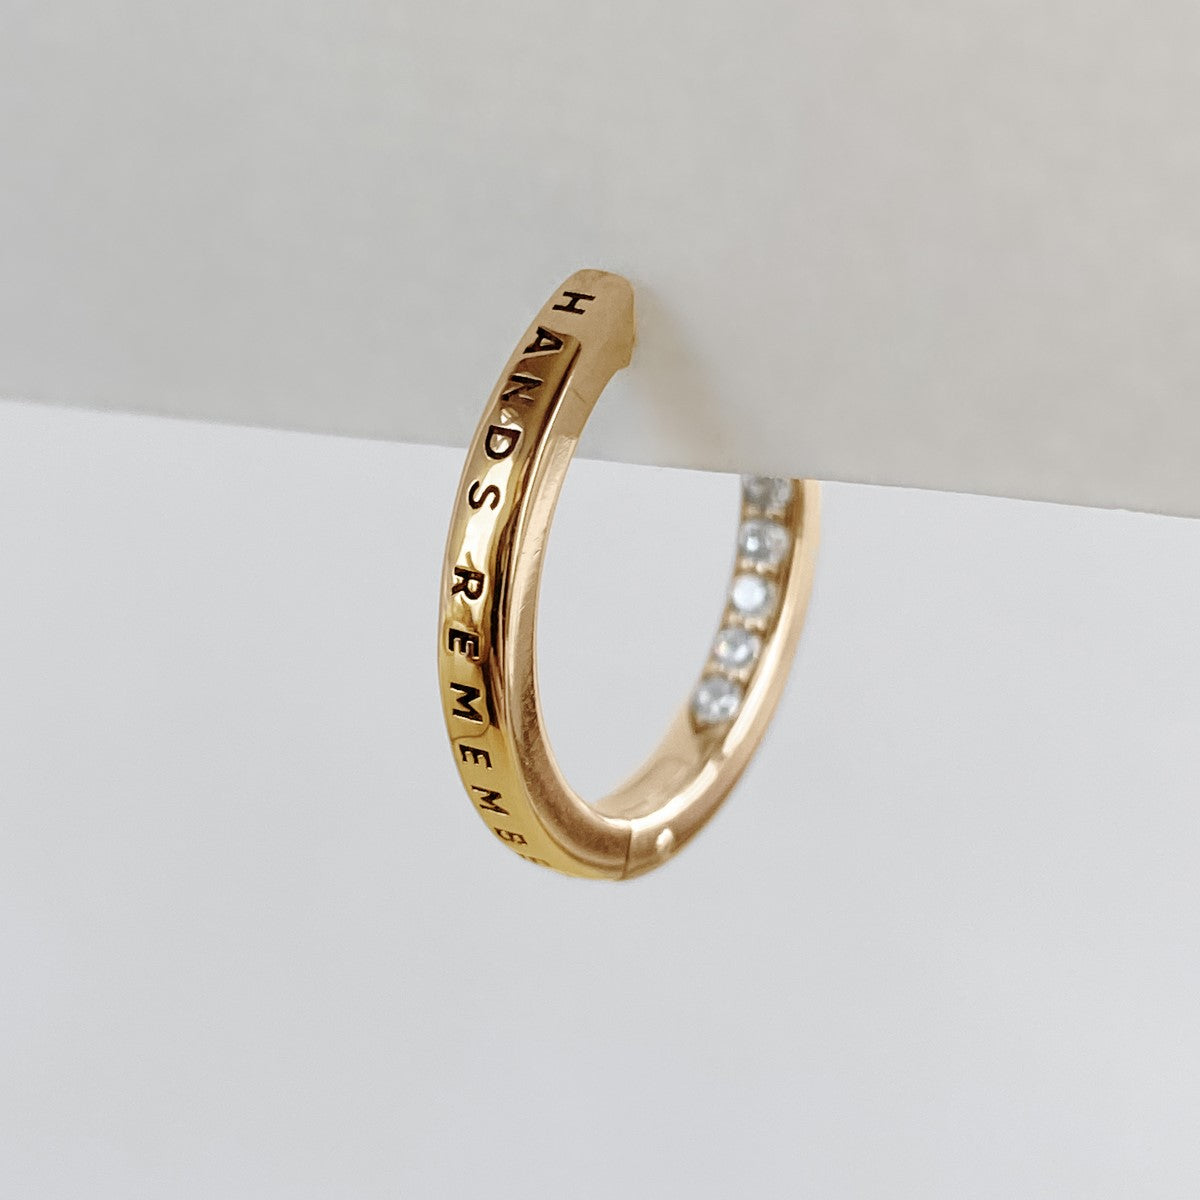 HOOP EARRING "MEMORIES" WITH WHITE DIAMONDS | GOLD